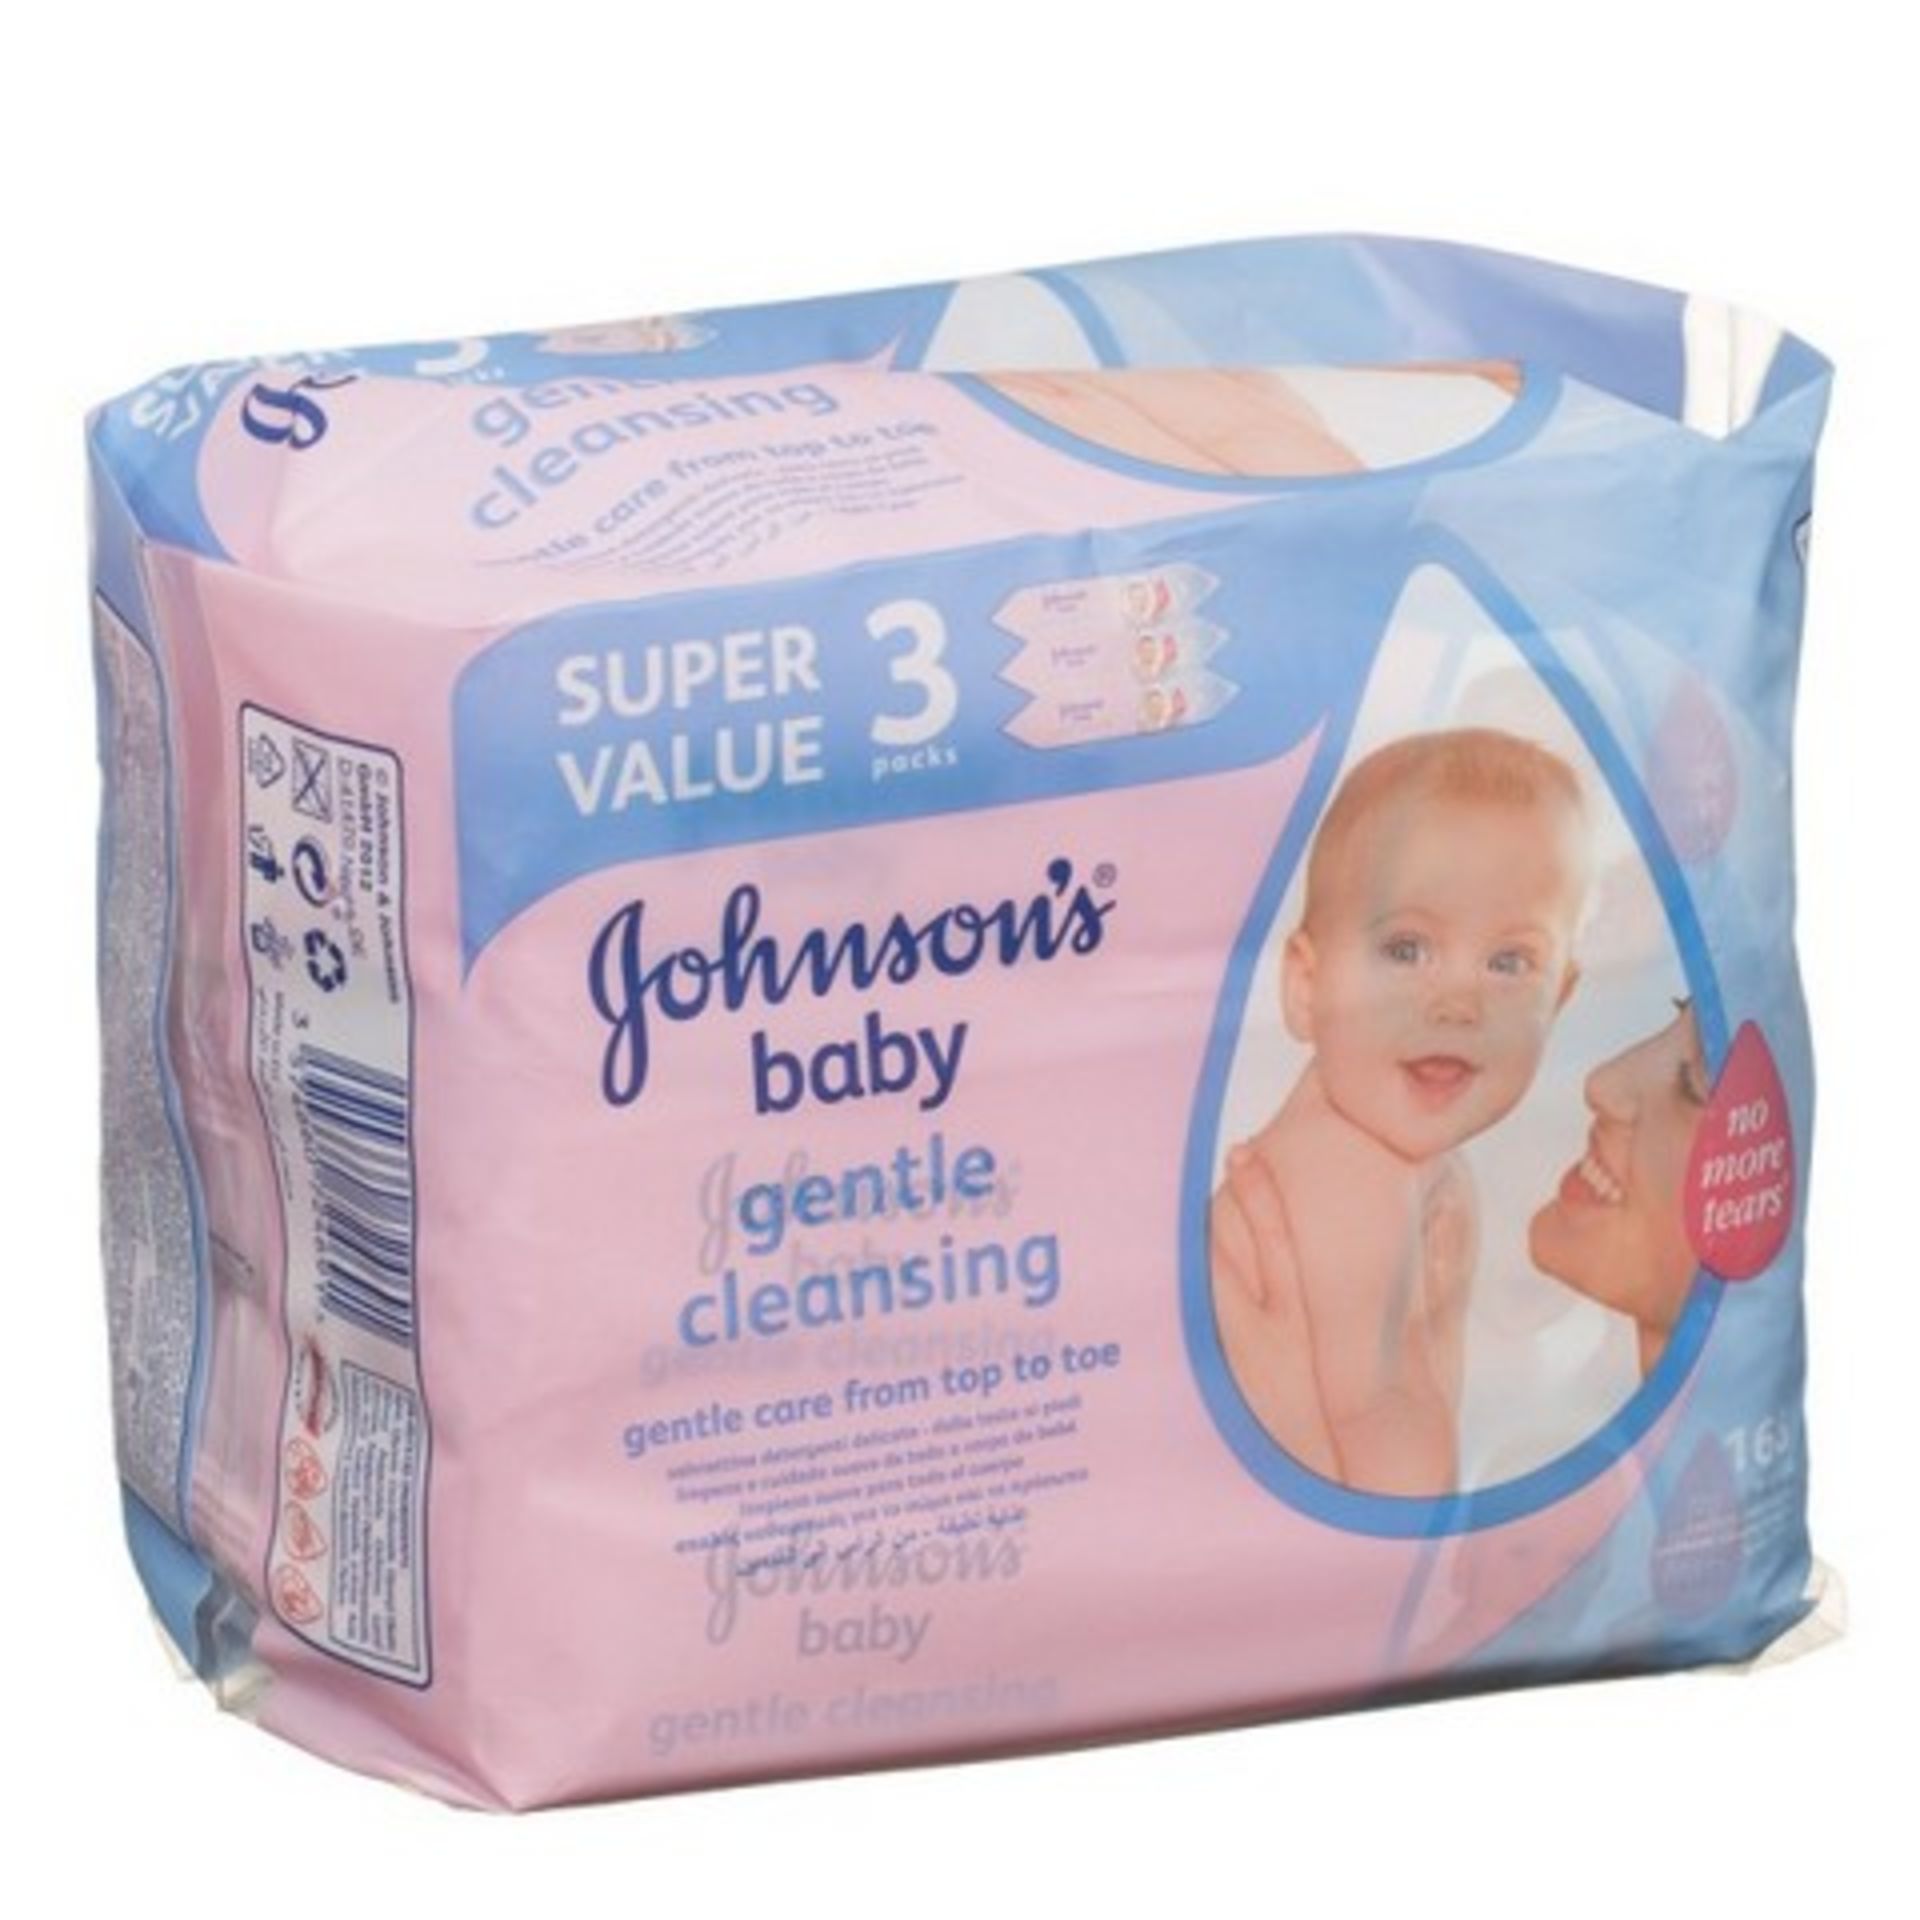 V Brand New One Triple Pack Of 168 Johnsons Baby Gentle Cleansing Wipes RRP 9.85